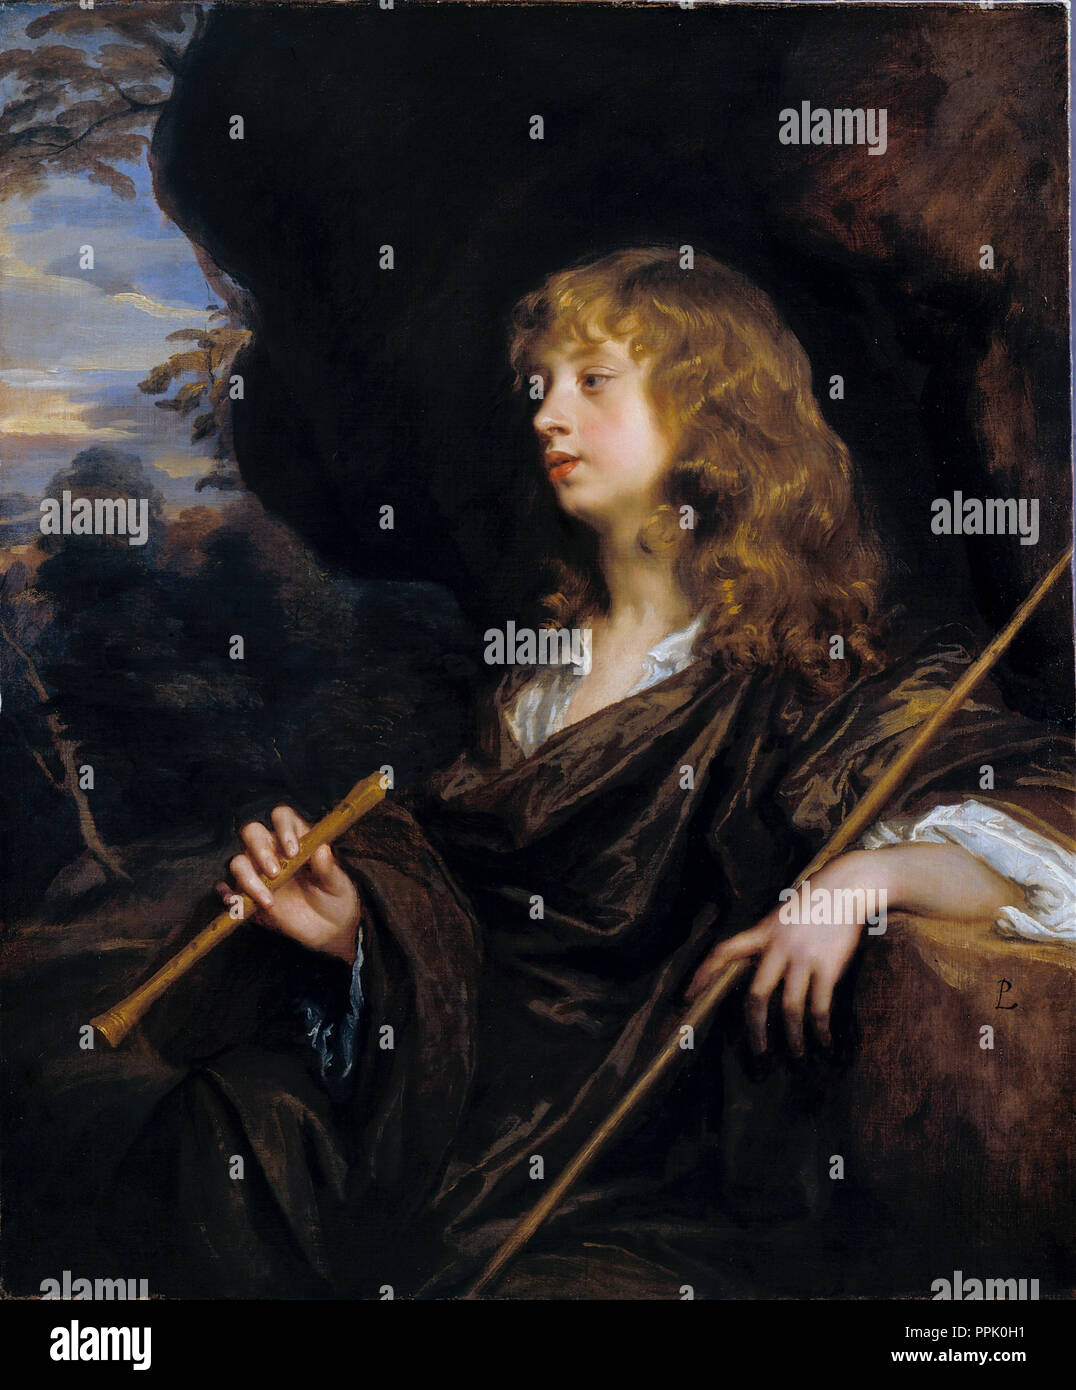 A Boy as a Shepherd. Date/Period: Ca. 1658-60. Painting. Oil on canvas Oil. Height: 914 mm (35.98 in); Width: 756 mm (29.76 in). Author: LELY, PETER. Peter Lely. Stock Photo